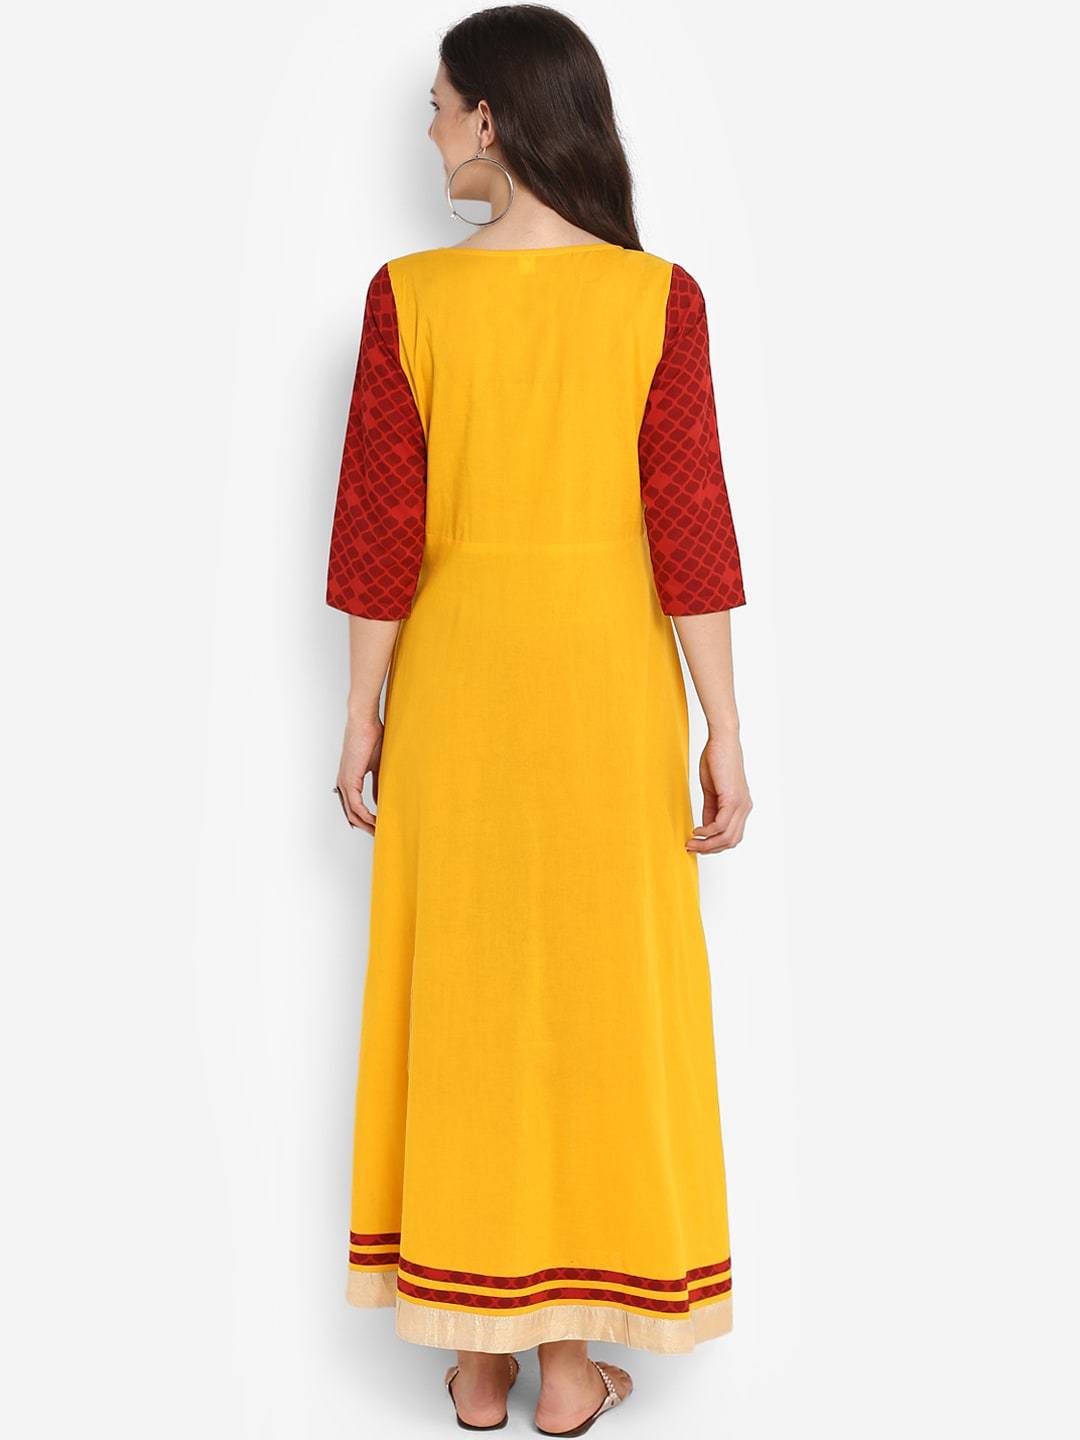 Women's Mustard Yellow Printed Fit and Flare Dress - Meeranshi